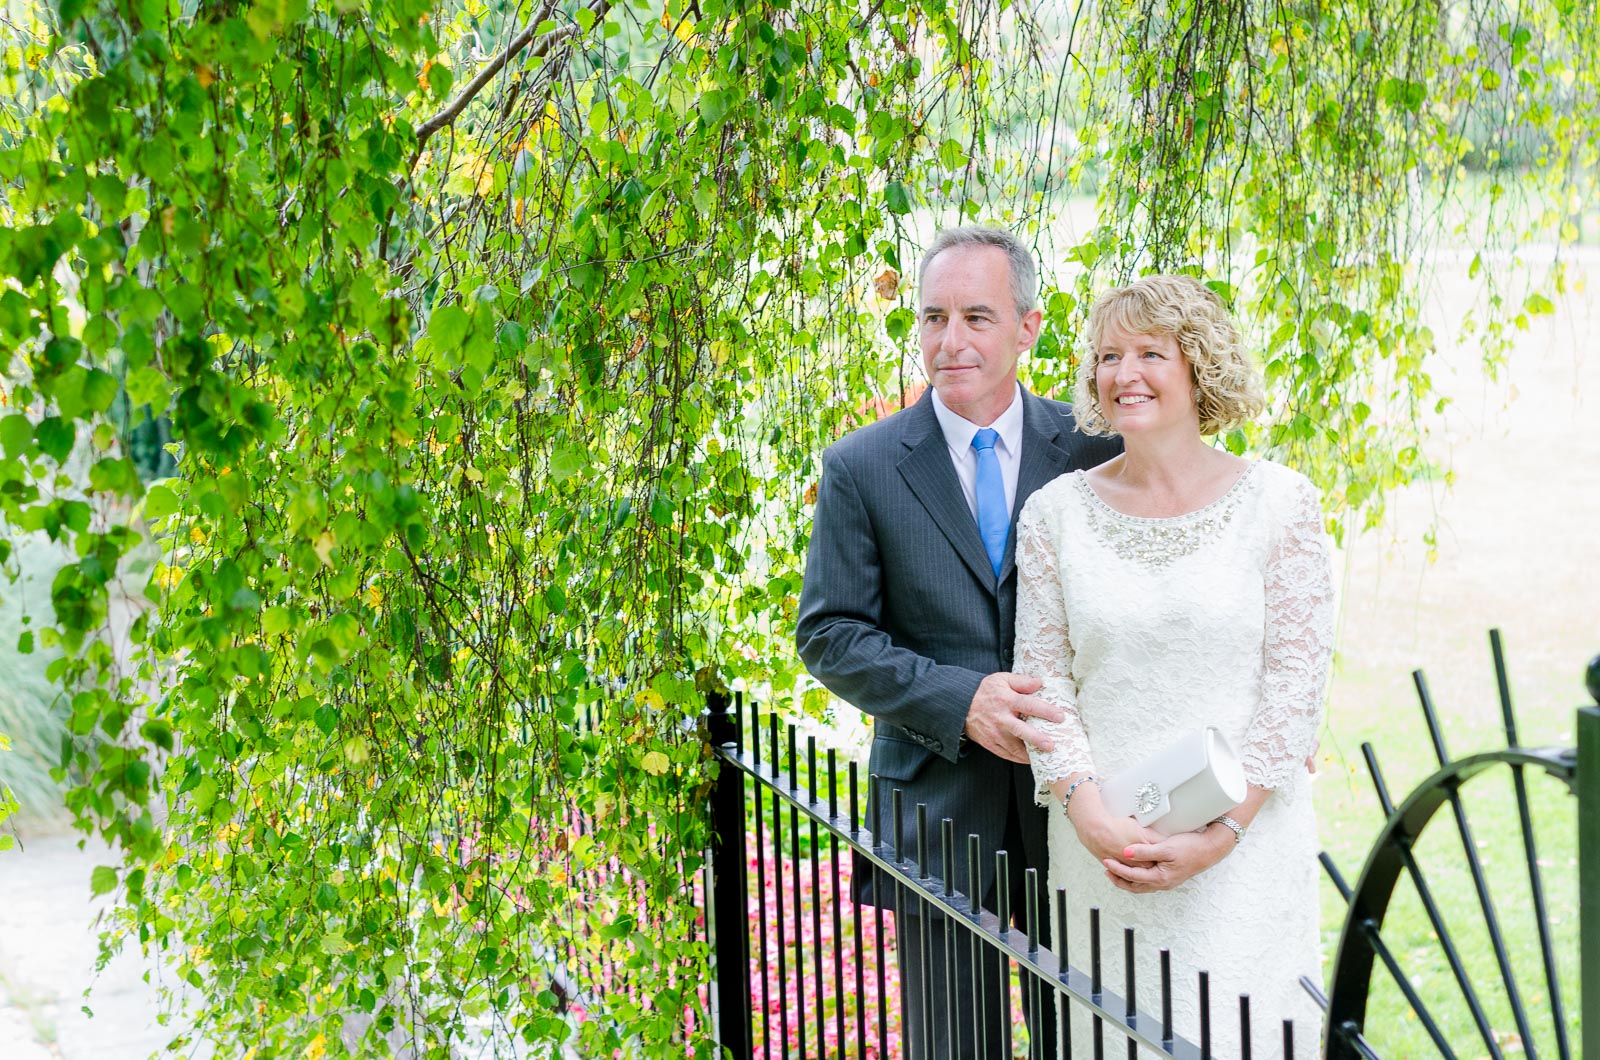 Wendy and Chris stand among trees in Southover Grange after their wedding at lewes Register Office.